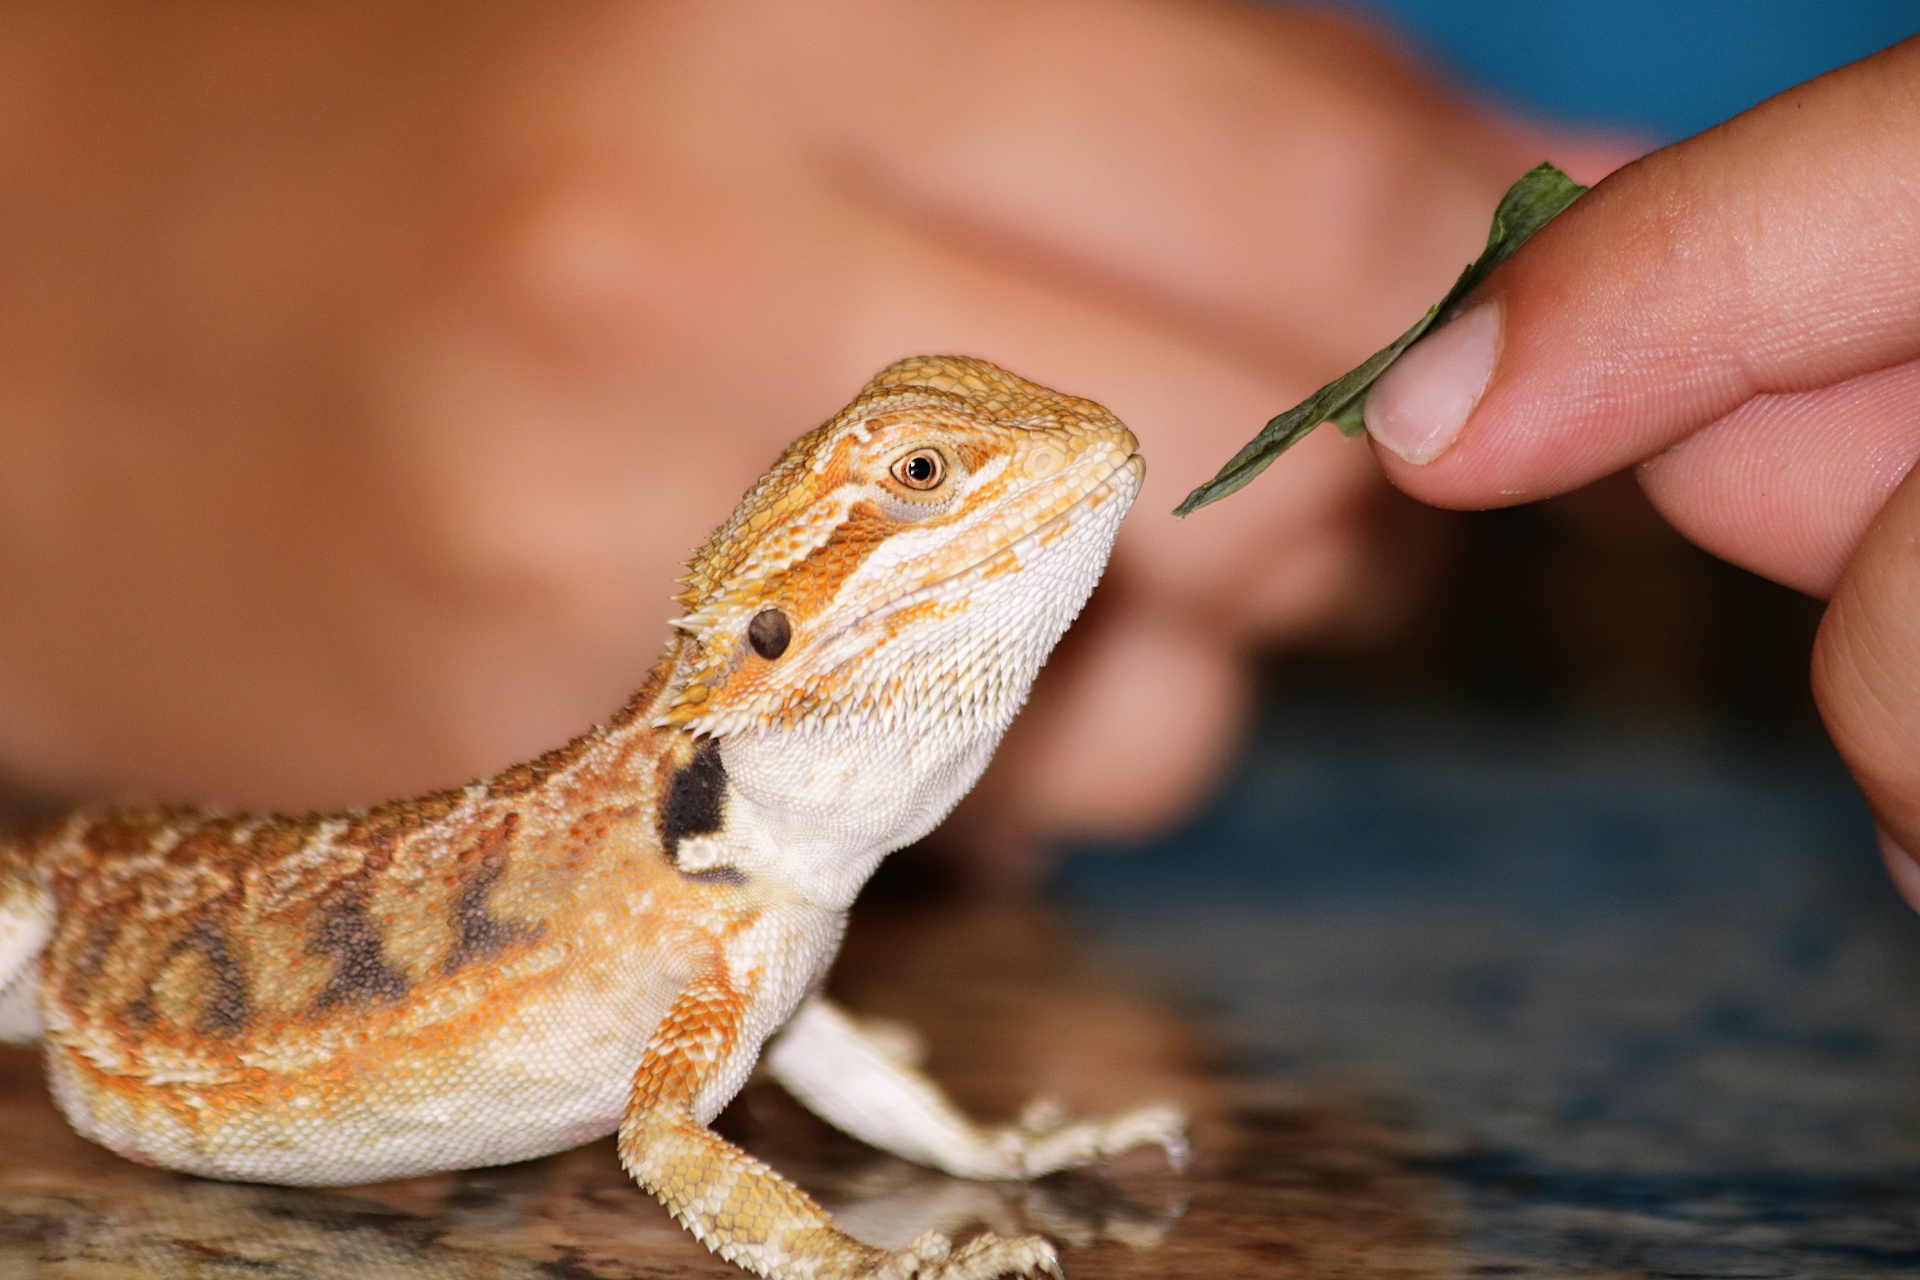 A golden and white bearded dragon is about to eat a small piece of lettuce from his owners fingers.